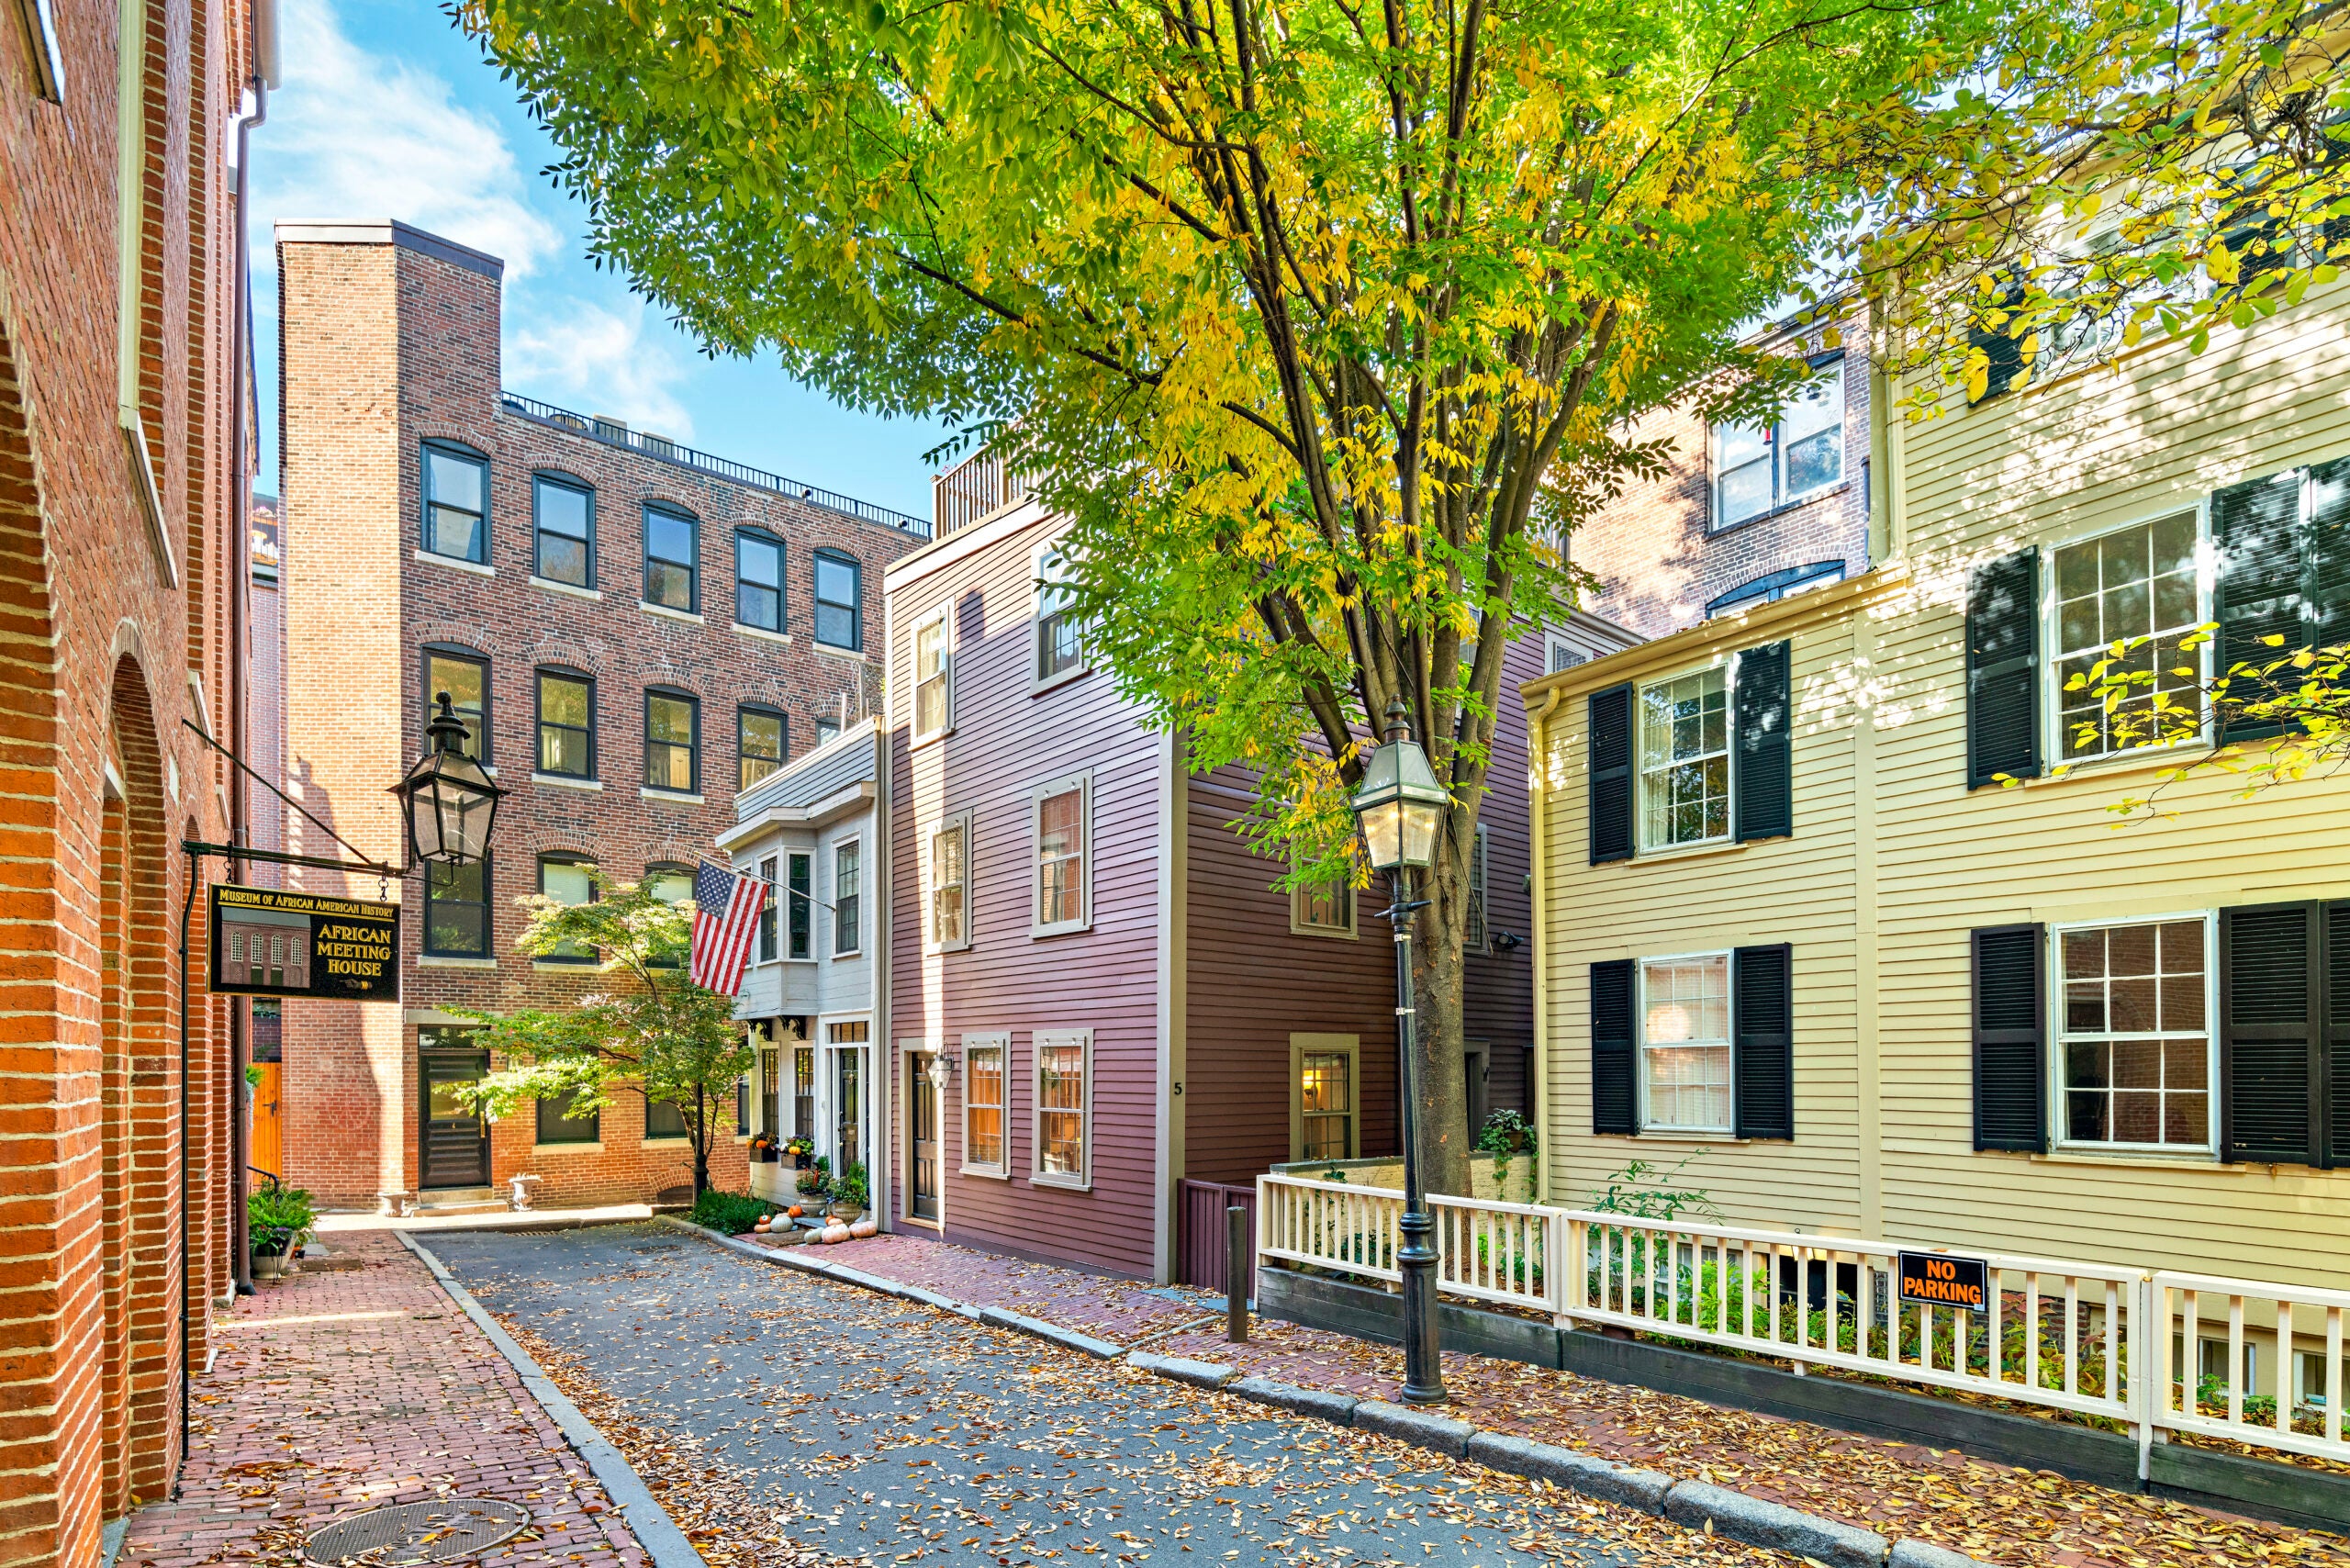 A view of historic homes along a cobblestone street with gas lamps. A big tree starting to turn color for fall stands on the sidewalk in front of a yellow Colonial with black shutters. A pink multi-story house stands next to that.